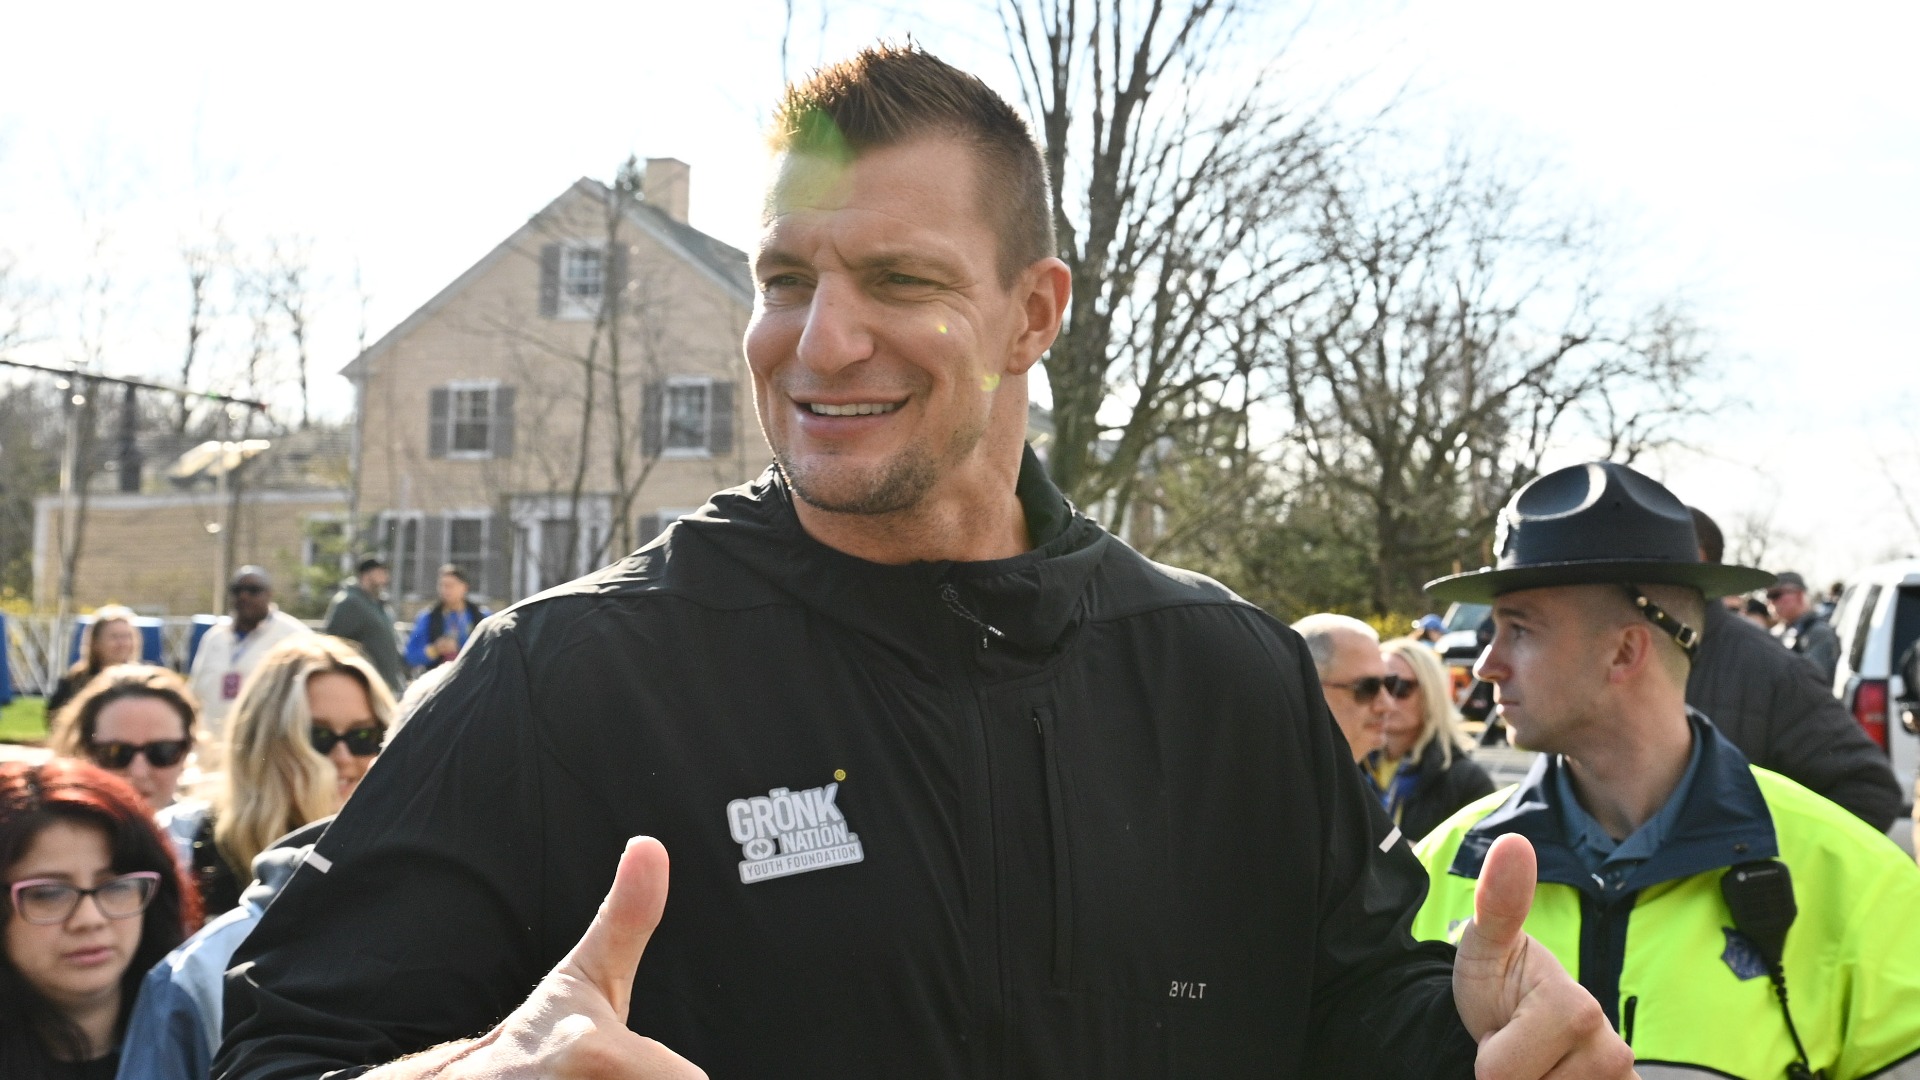 Rob Gronkowski Throws On-Brand First Pitch On Patriots’ Day [Video]